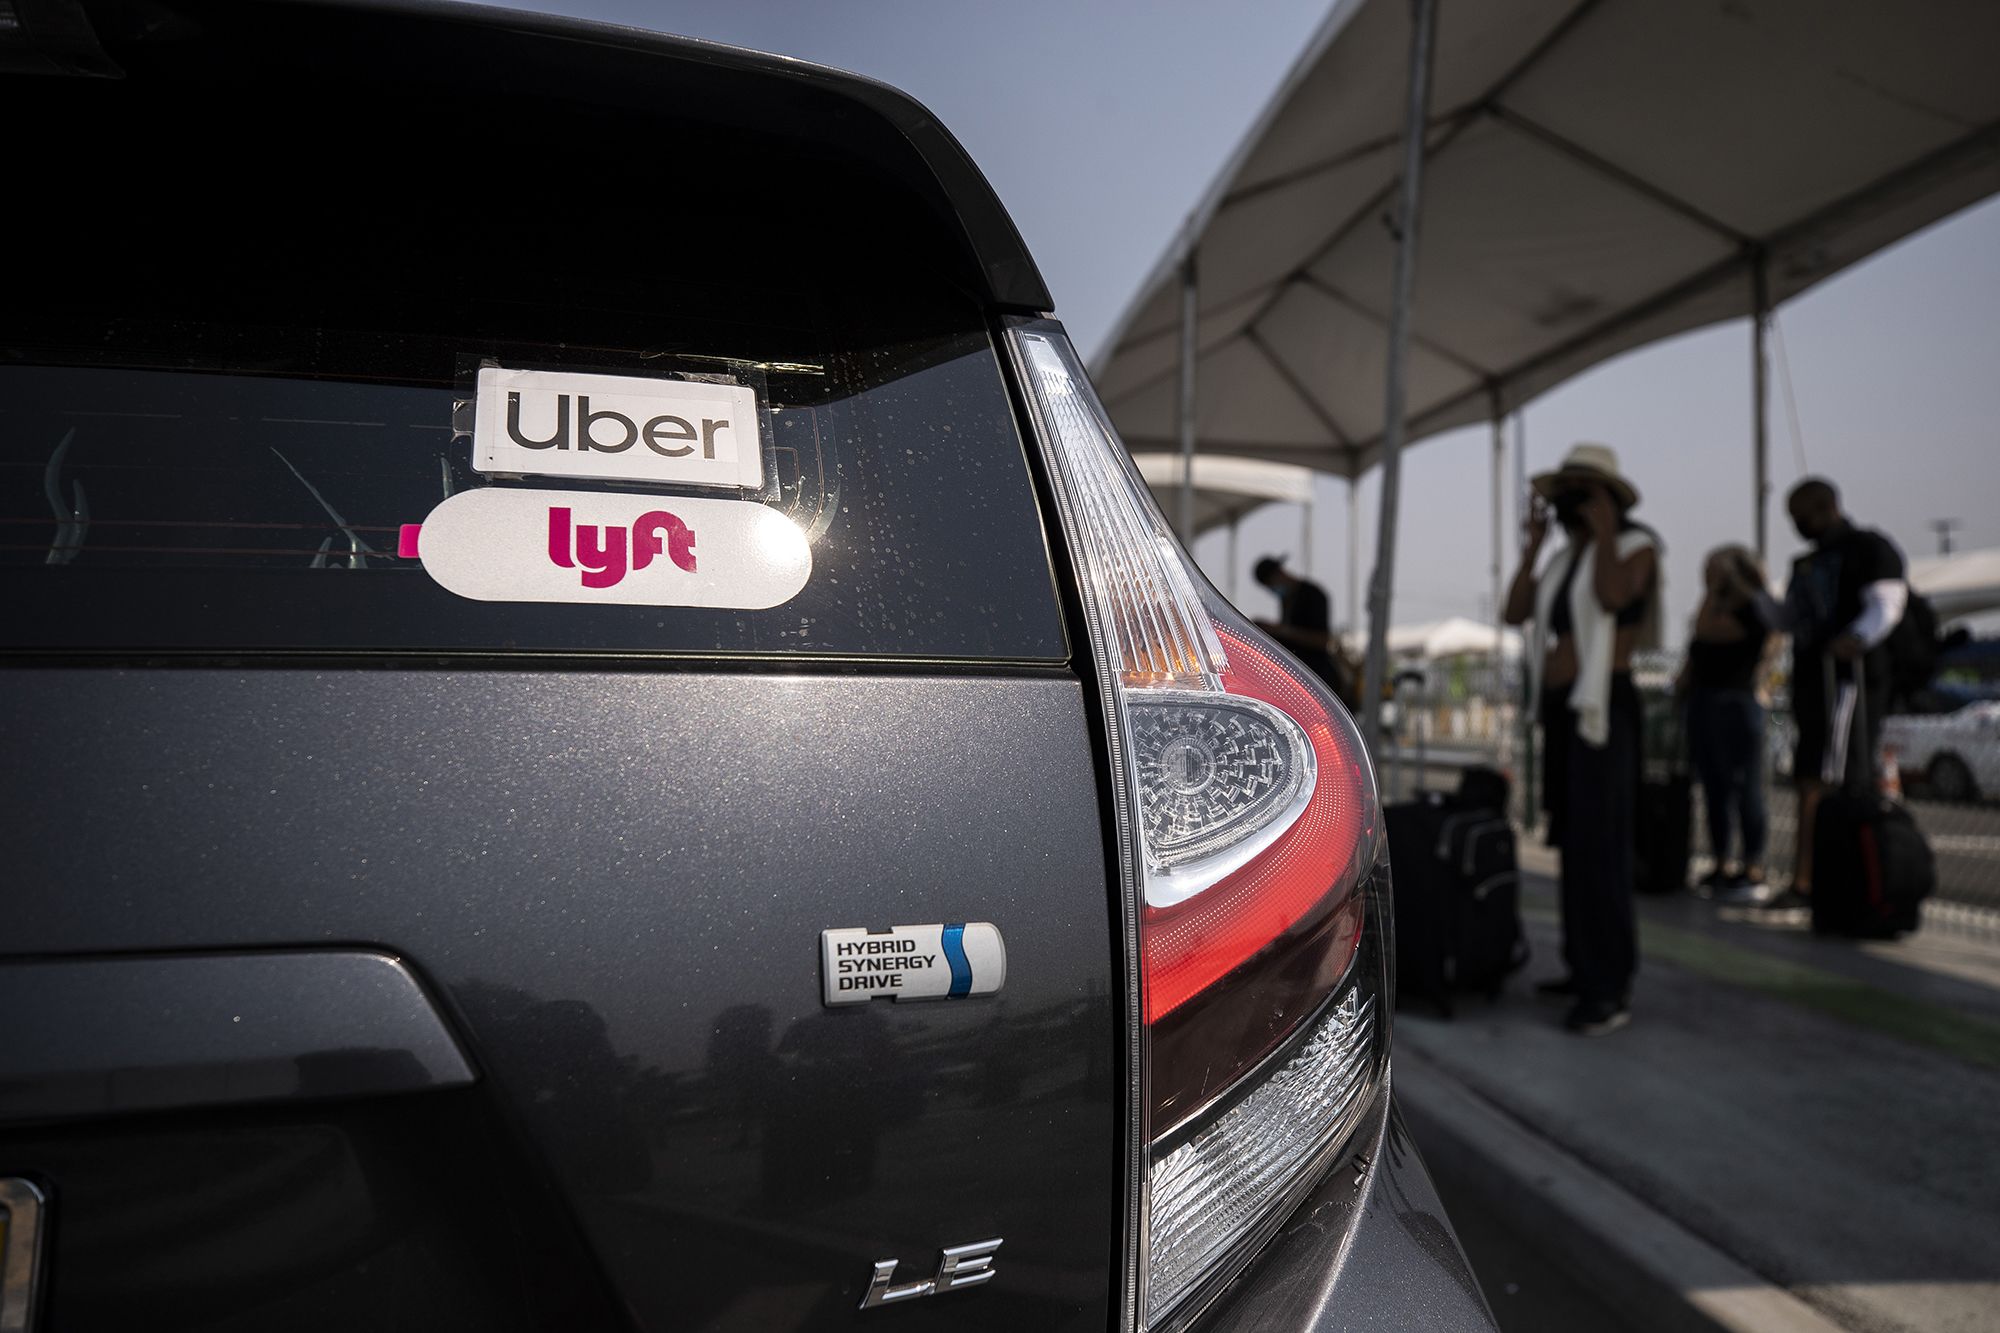 Uber and Lyft drivers in California say they've been spontaneously